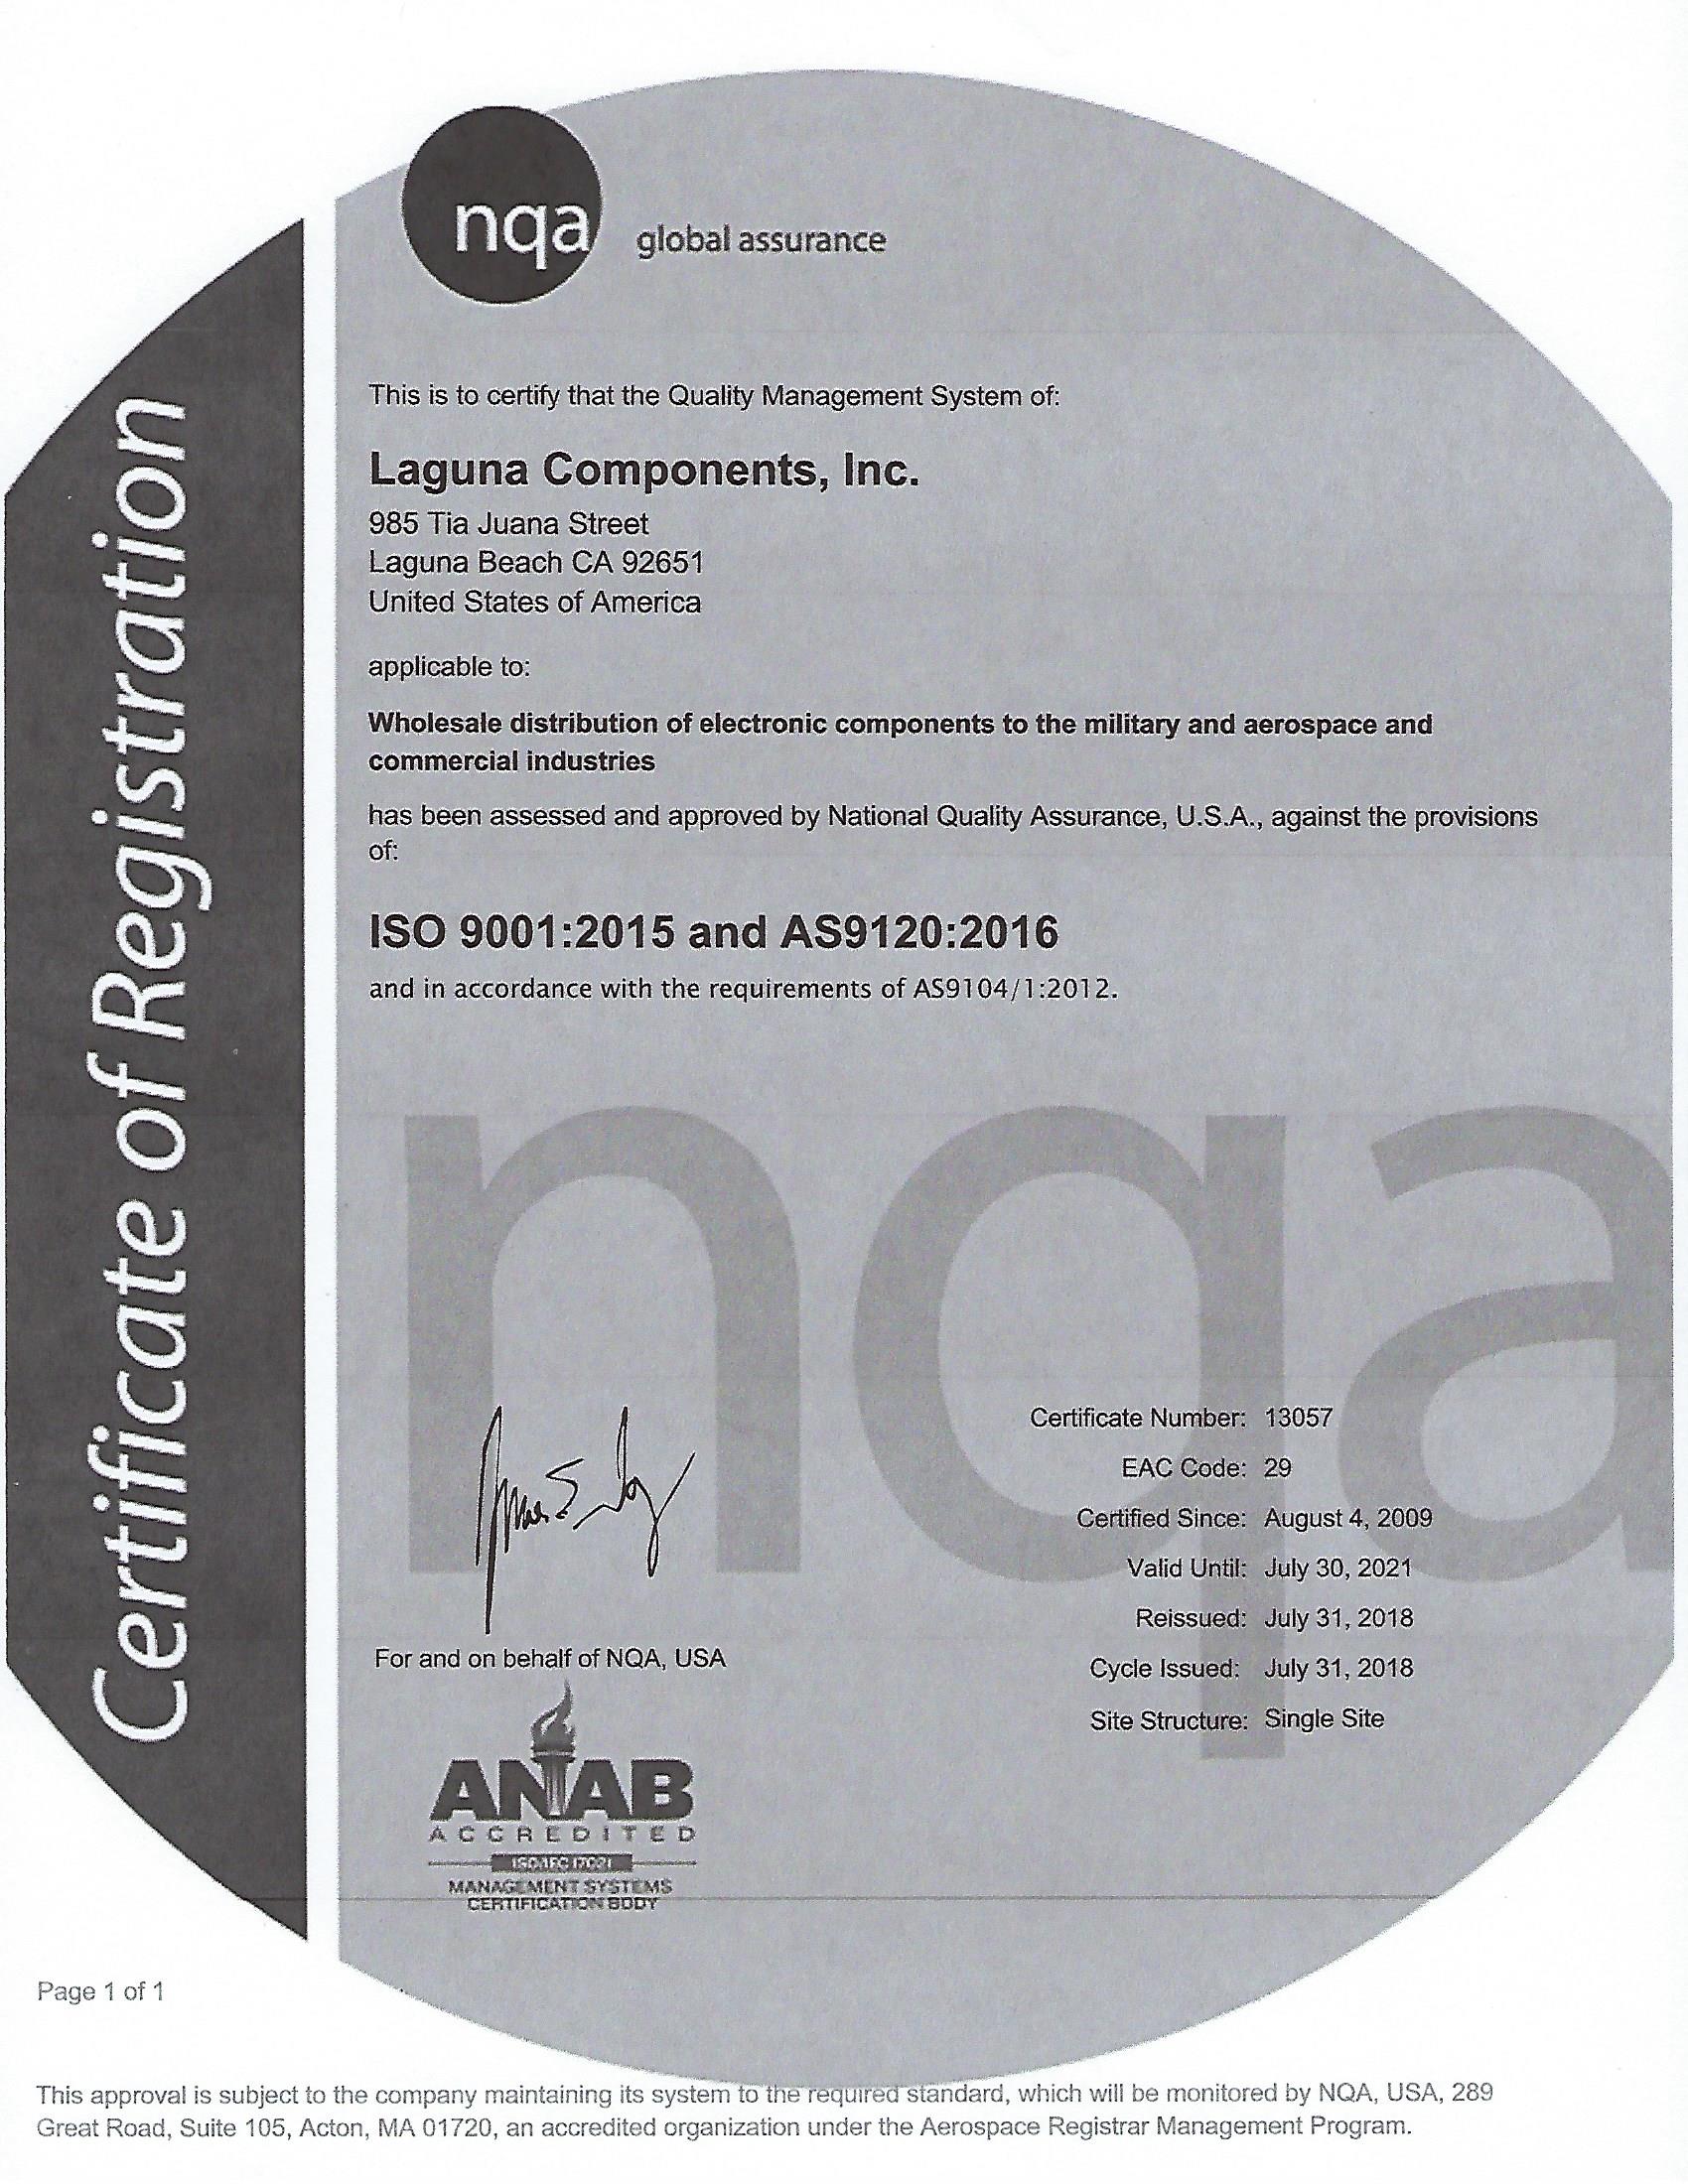 ISO 9001:2015 and AS9120B 